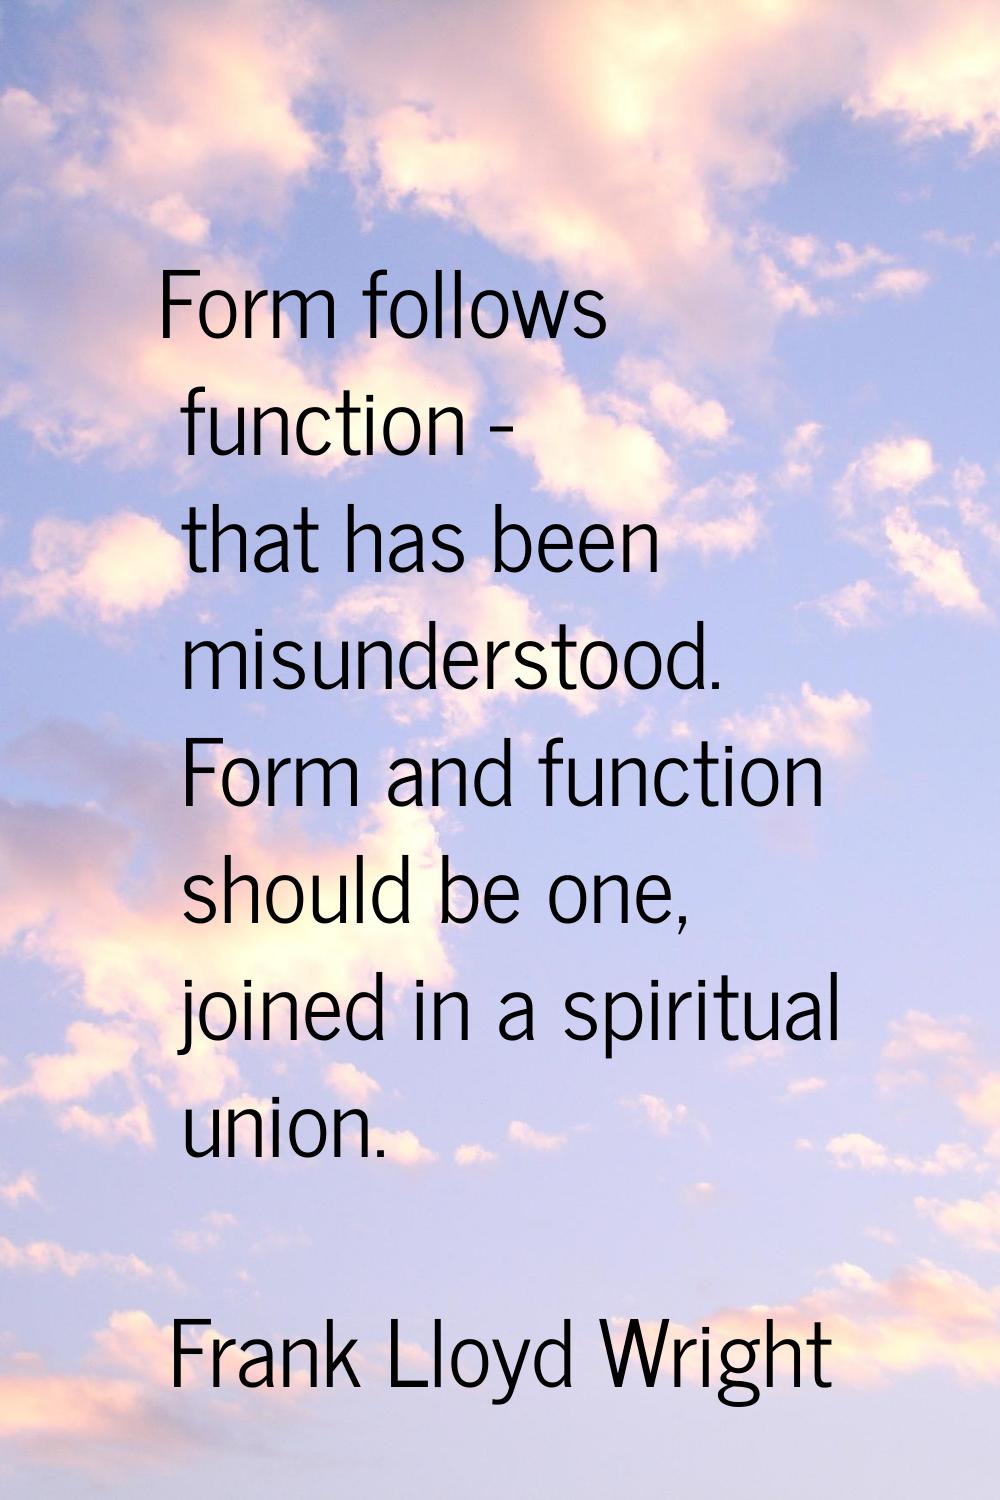 Form follows function - that has been misunderstood. Form and function should be one, joined in a s